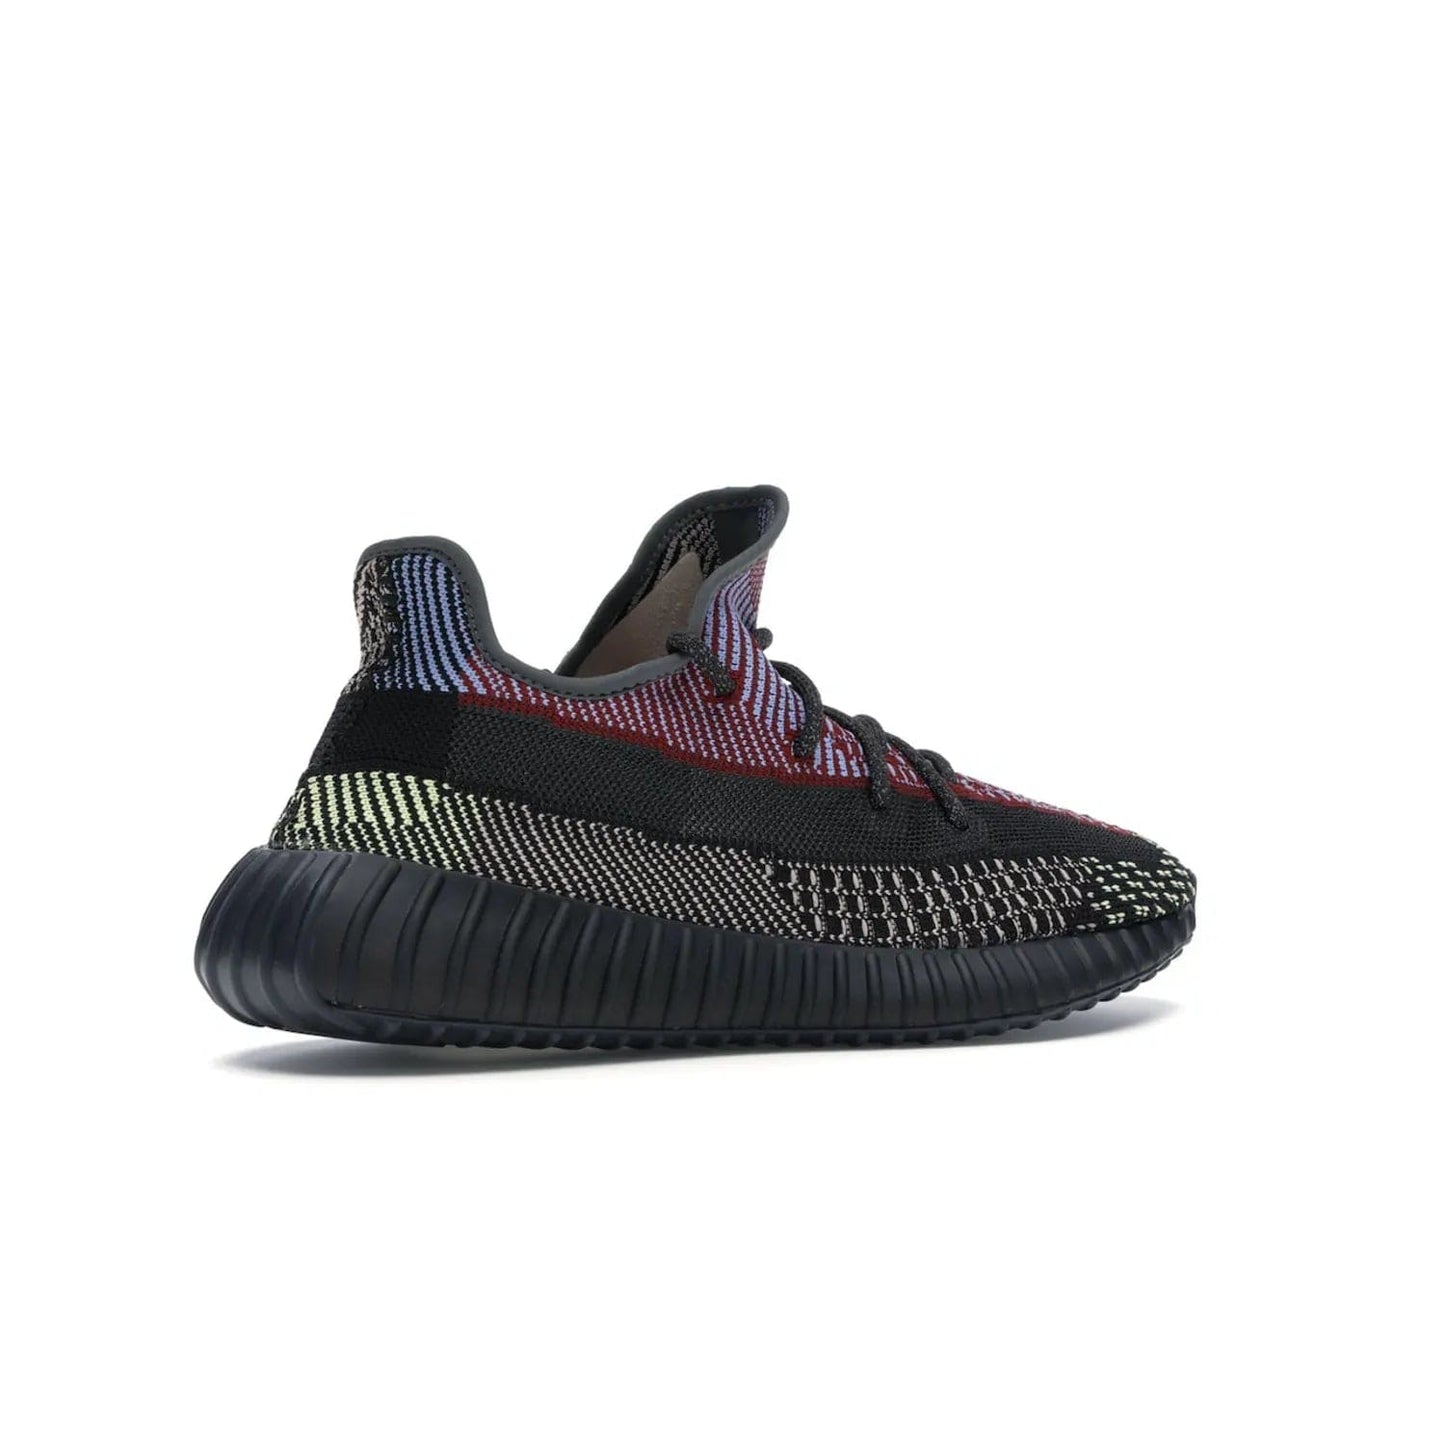 adidas Yeezy Boost 350 V2 Yecheil (Non-Reflective) - Image 34 - Only at www.BallersClubKickz.com - Make a statement with the eye-catching adidas Yeezy Boost 350 V2 Yecheil Non-Reflective. Featuring a spectrum of colorful hues, black upper, Boost cushioning, and black side stripe, the sneaker brings a luxe yet playful finish to any outfit.